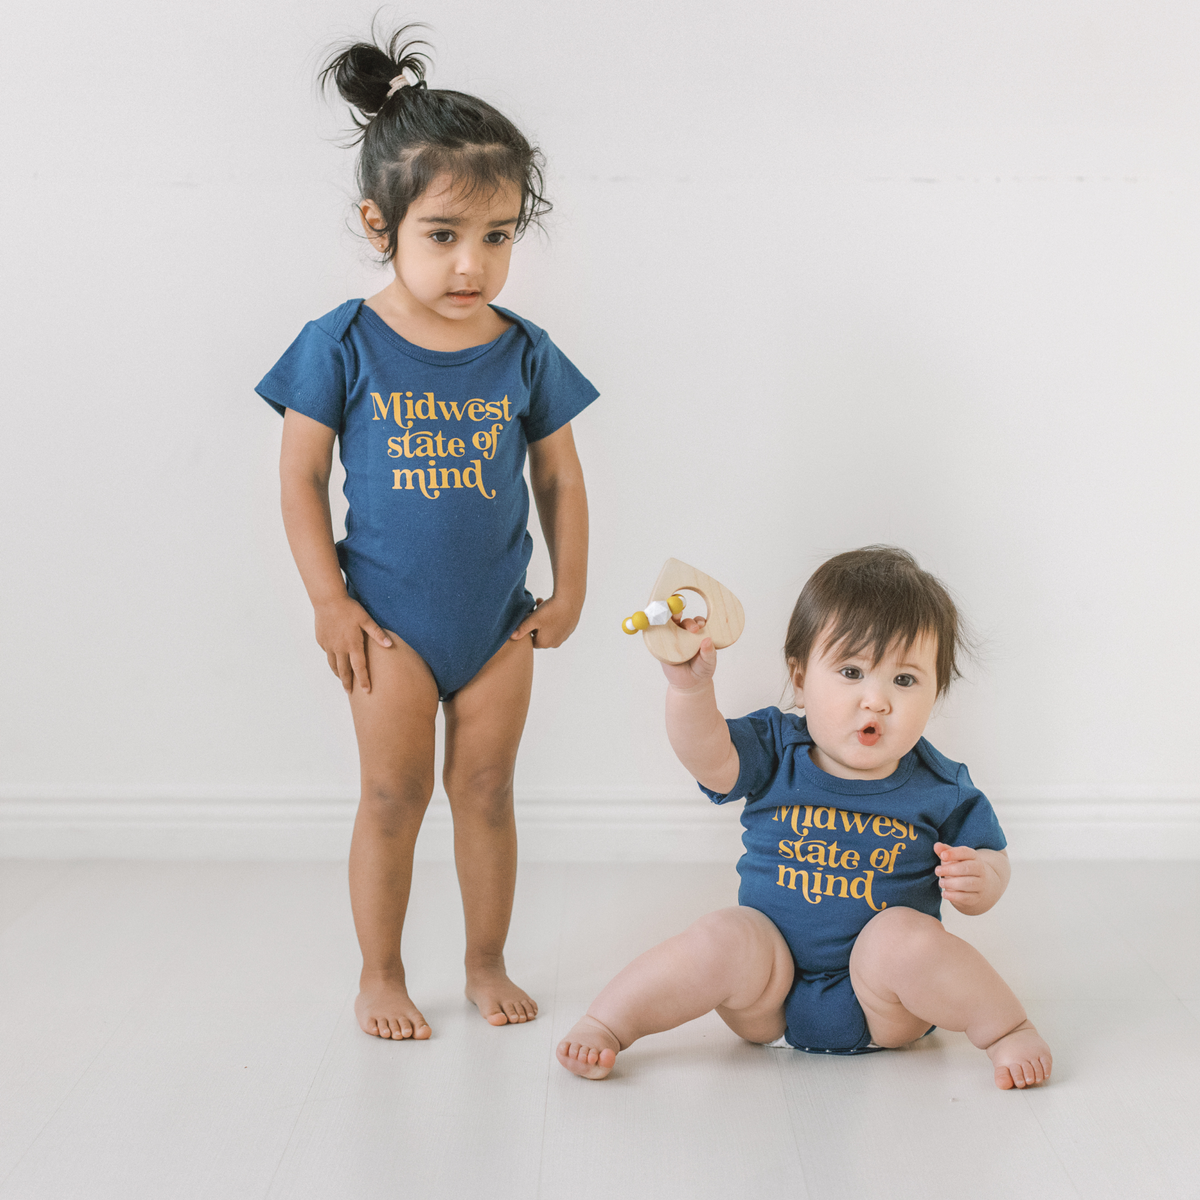 Midwest State of Mind Baby Onesie